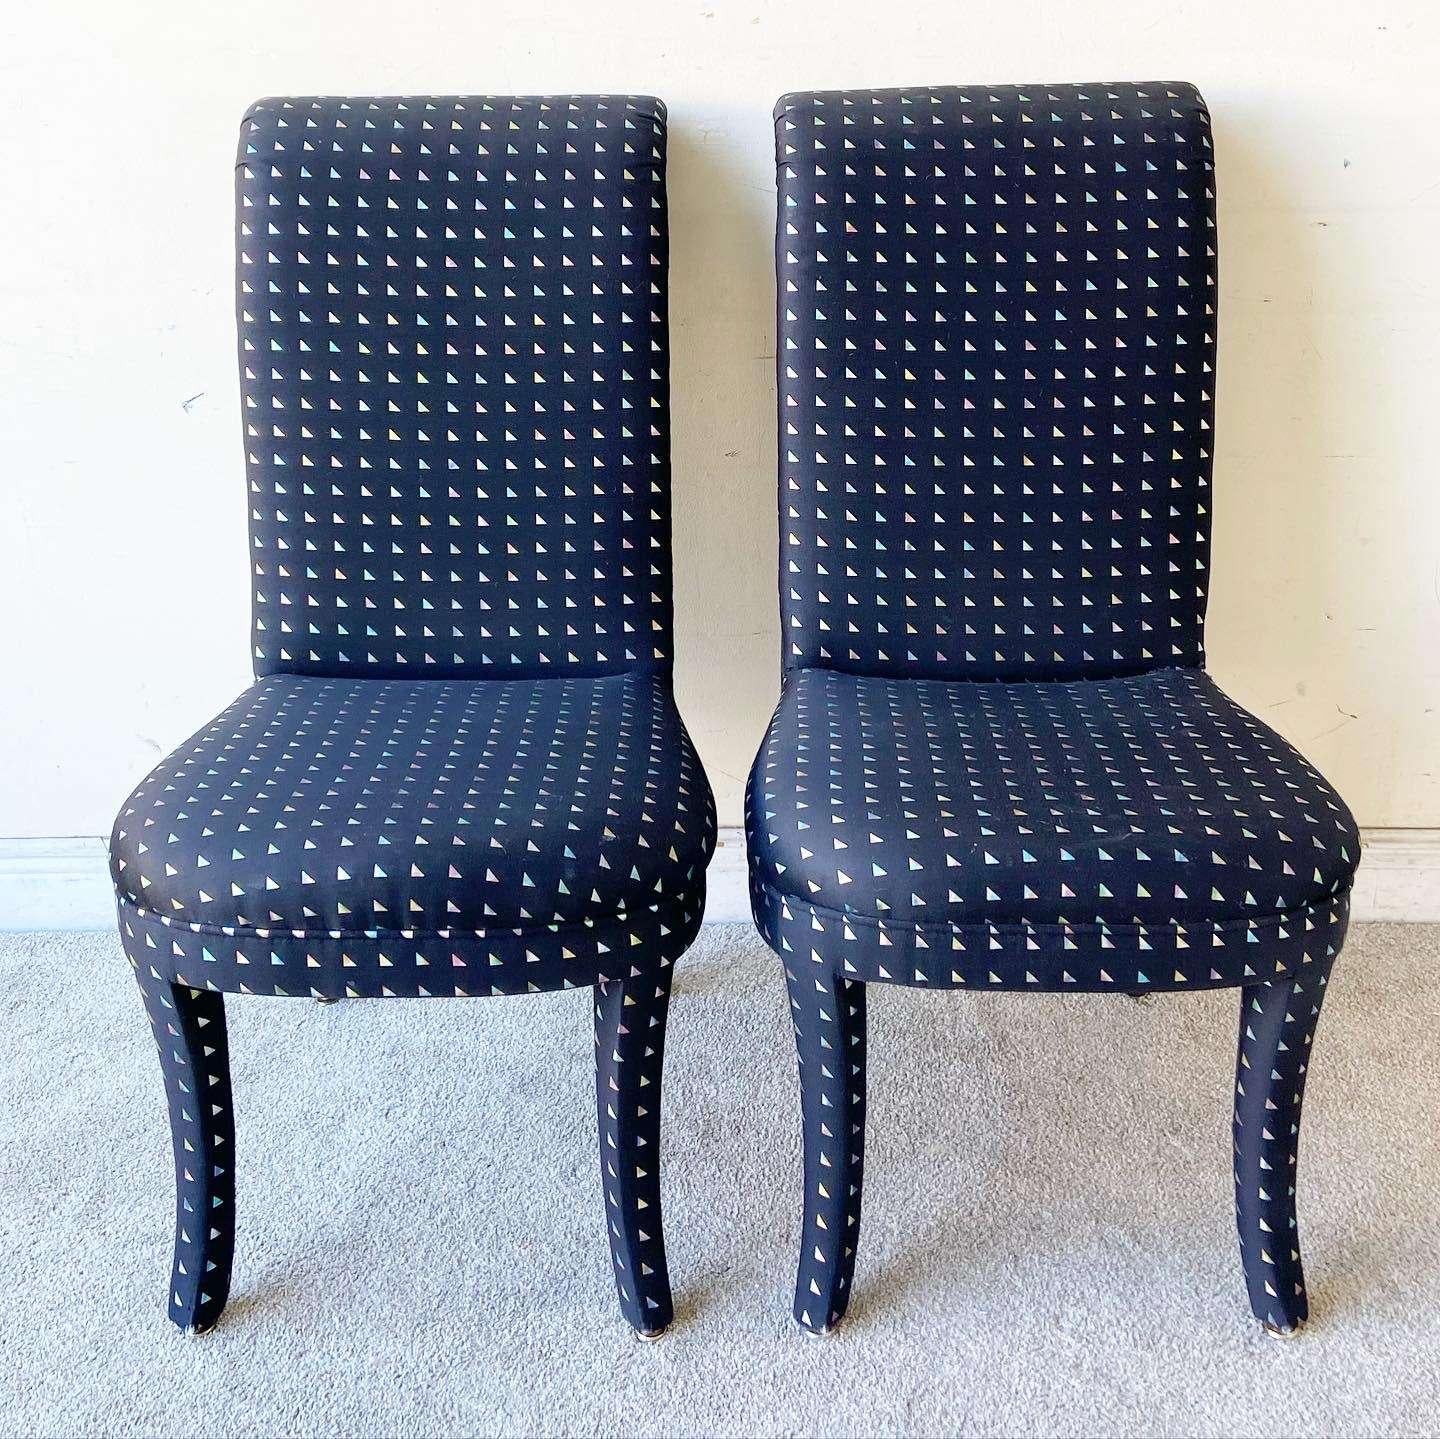 Exceptional set of 6 postmodern Dining chairs but Bernhardt. Each feature a black fabric with multicolored triangles throughout.

Seat height is 19.5 in